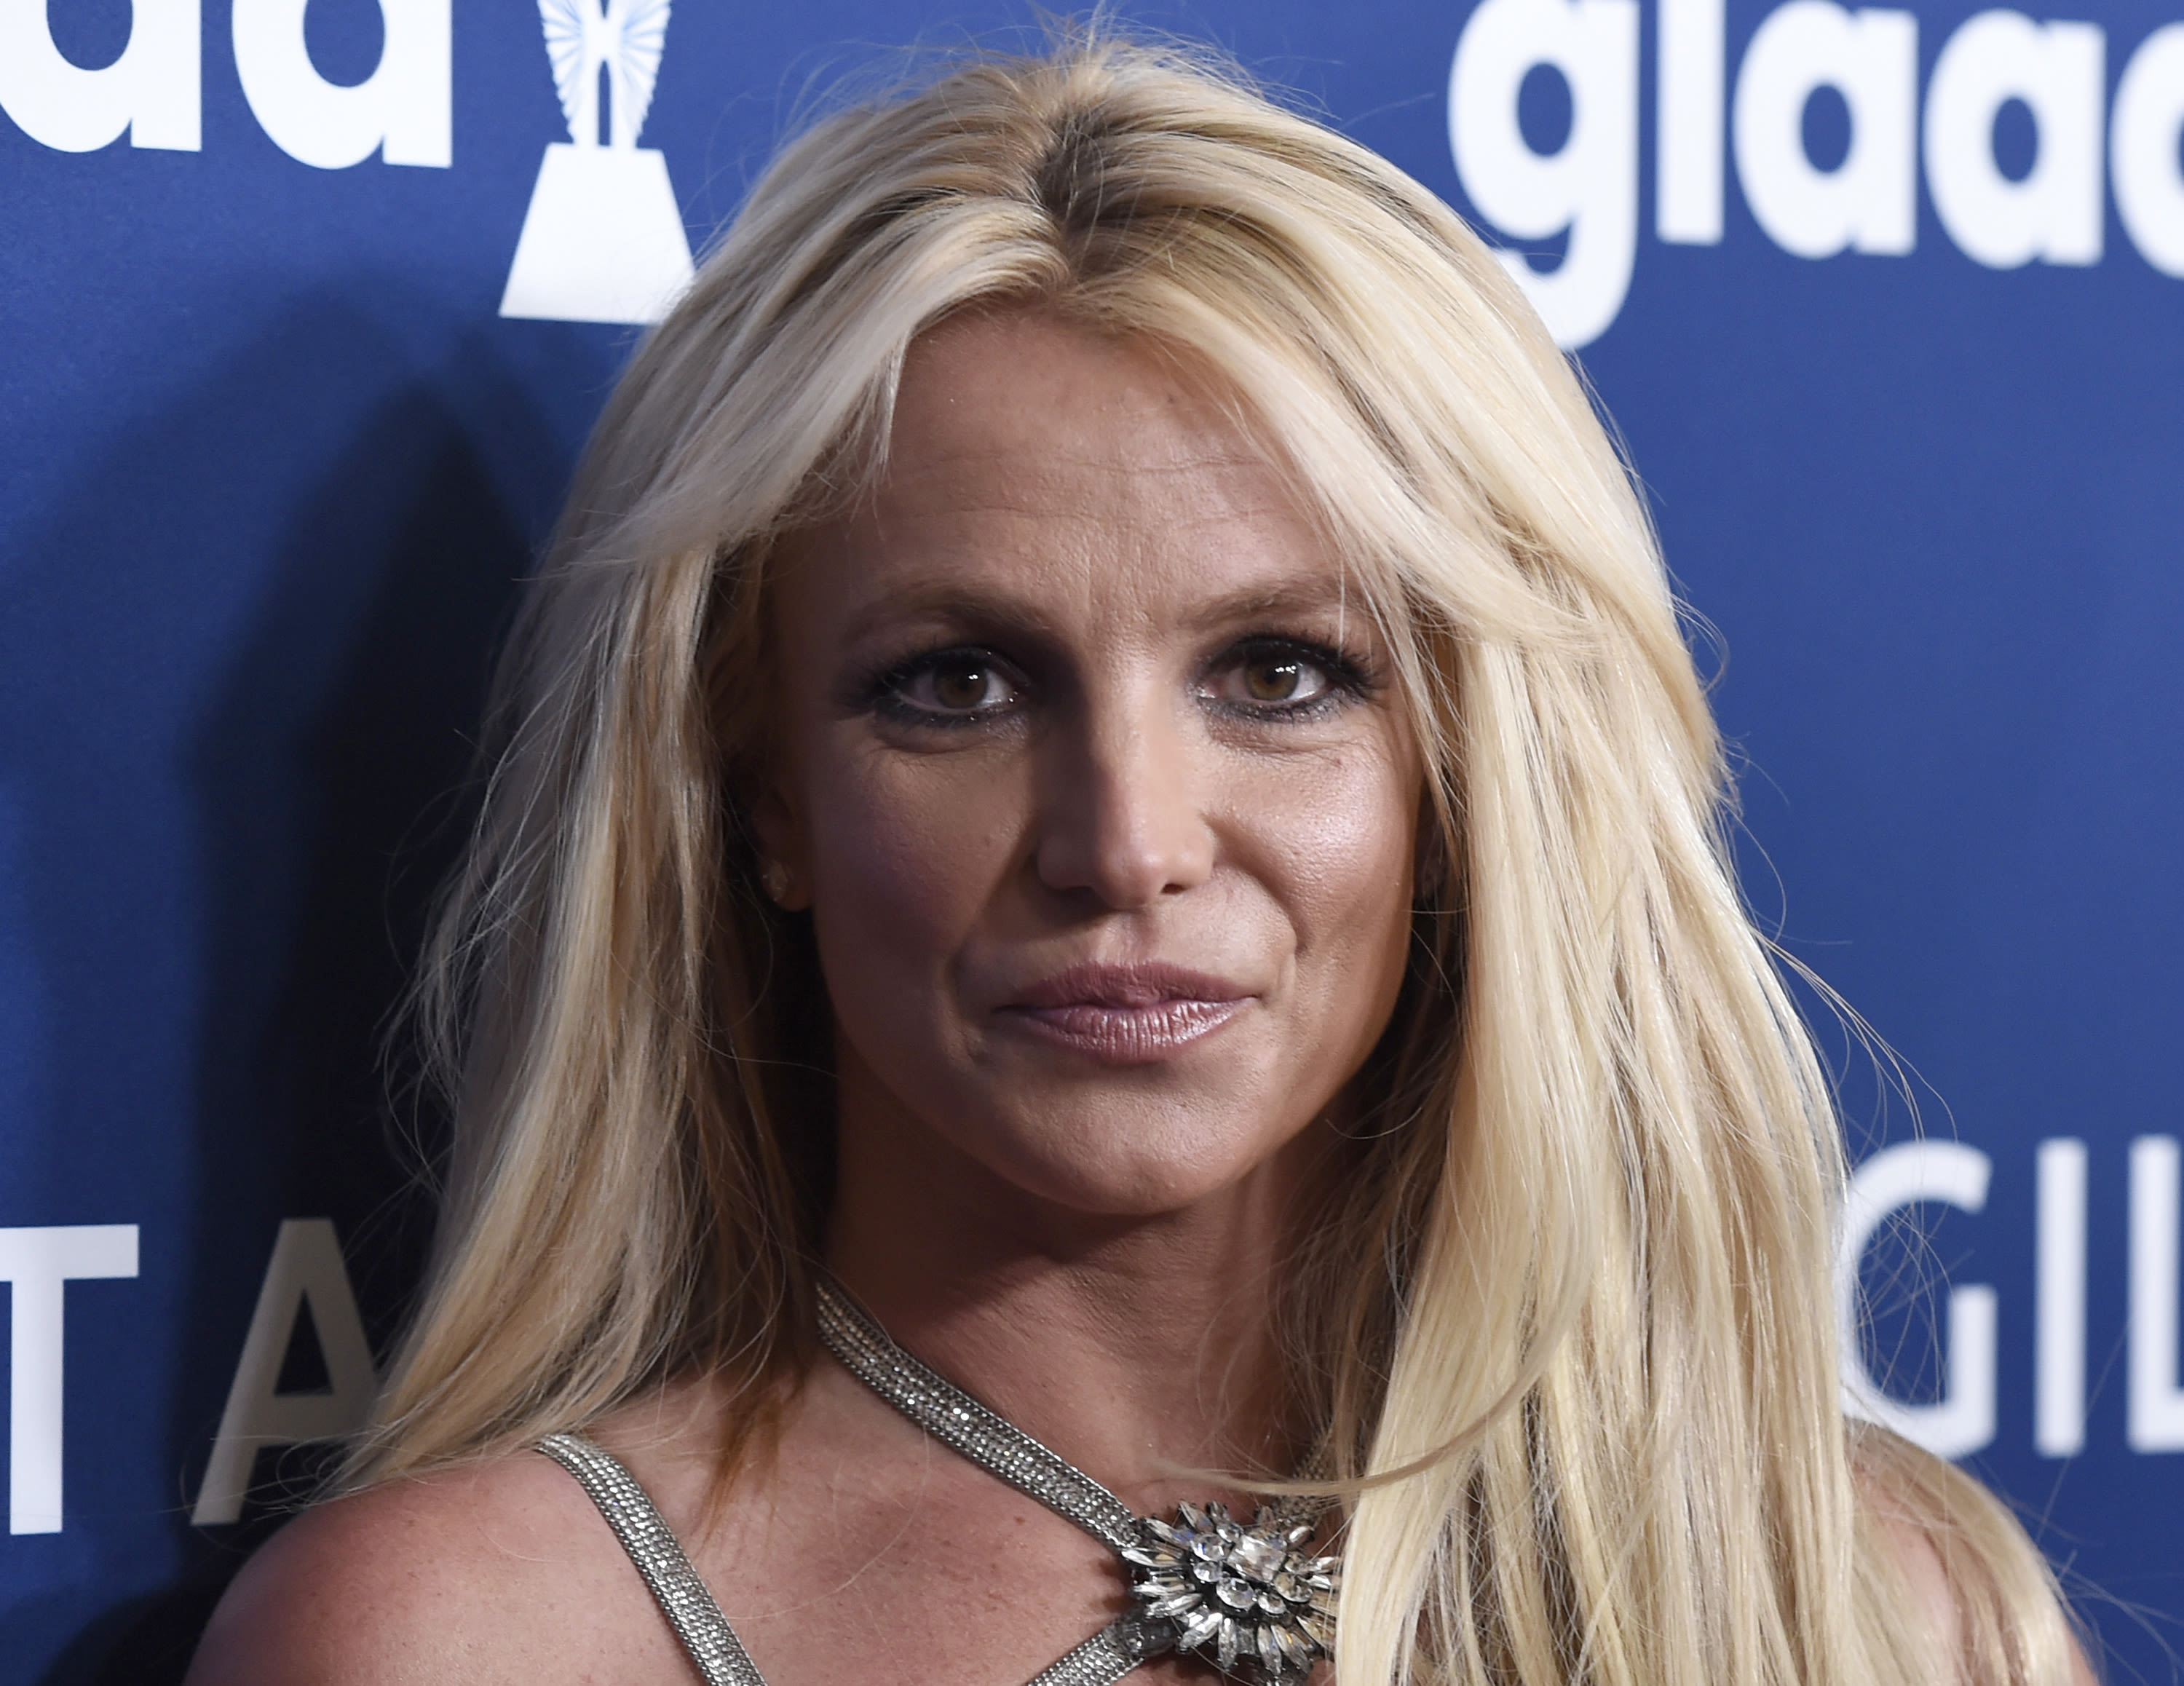 Britney Spears alleges she was 'gaslit and tricked' when she left Chateau Marmont